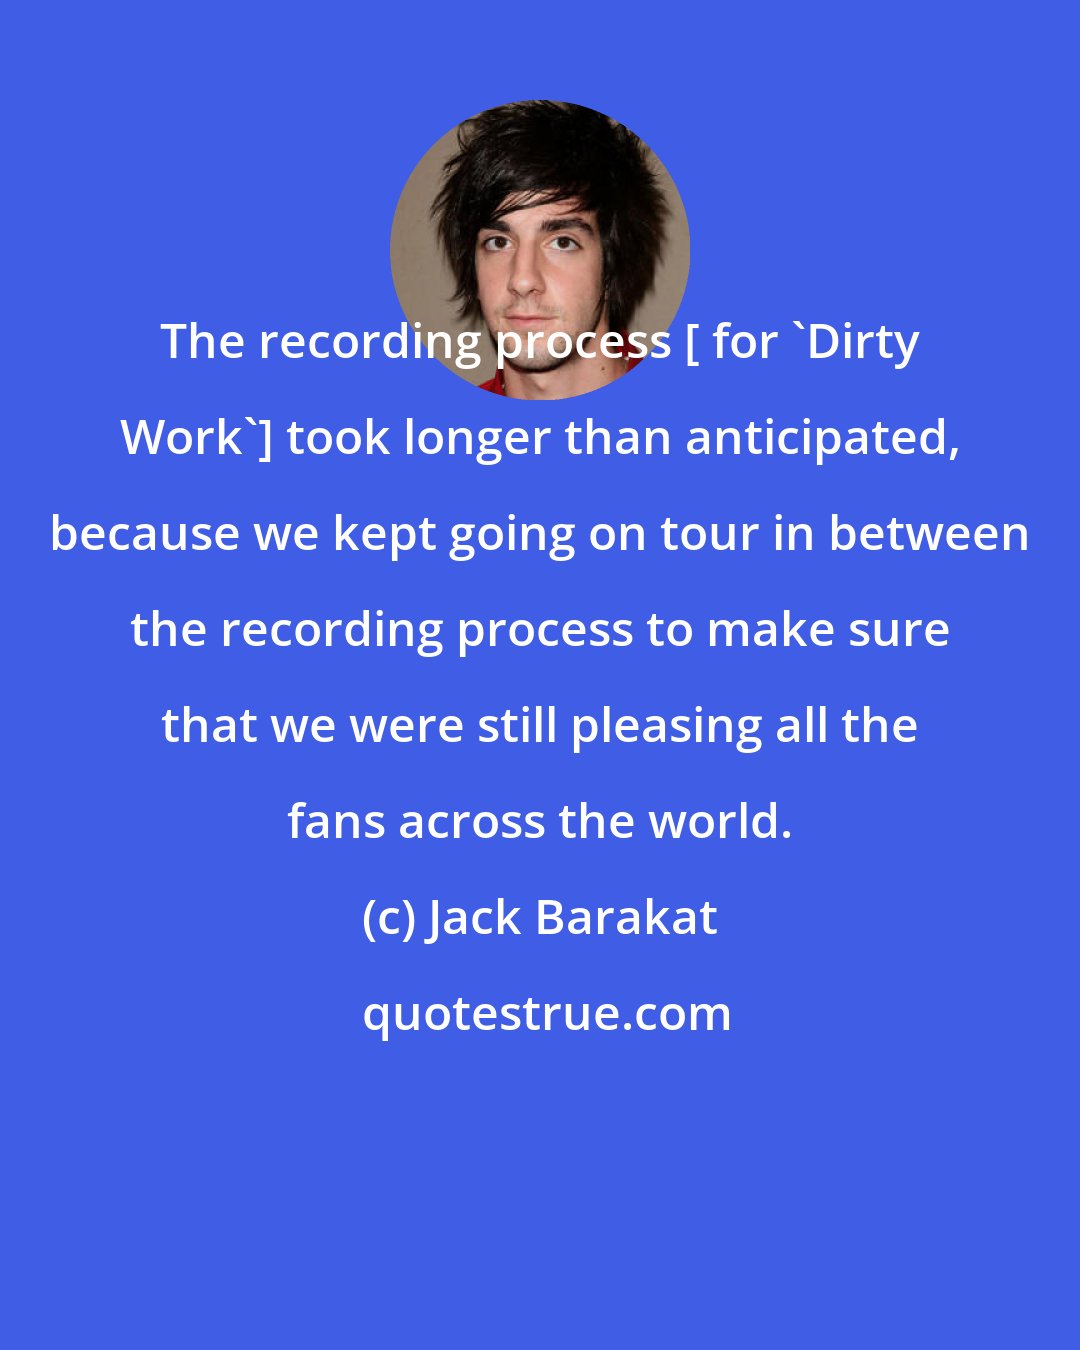 Jack Barakat: The recording process [ for 'Dirty Work'] took longer than anticipated, because we kept going on tour in between the recording process to make sure that we were still pleasing all the fans across the world.